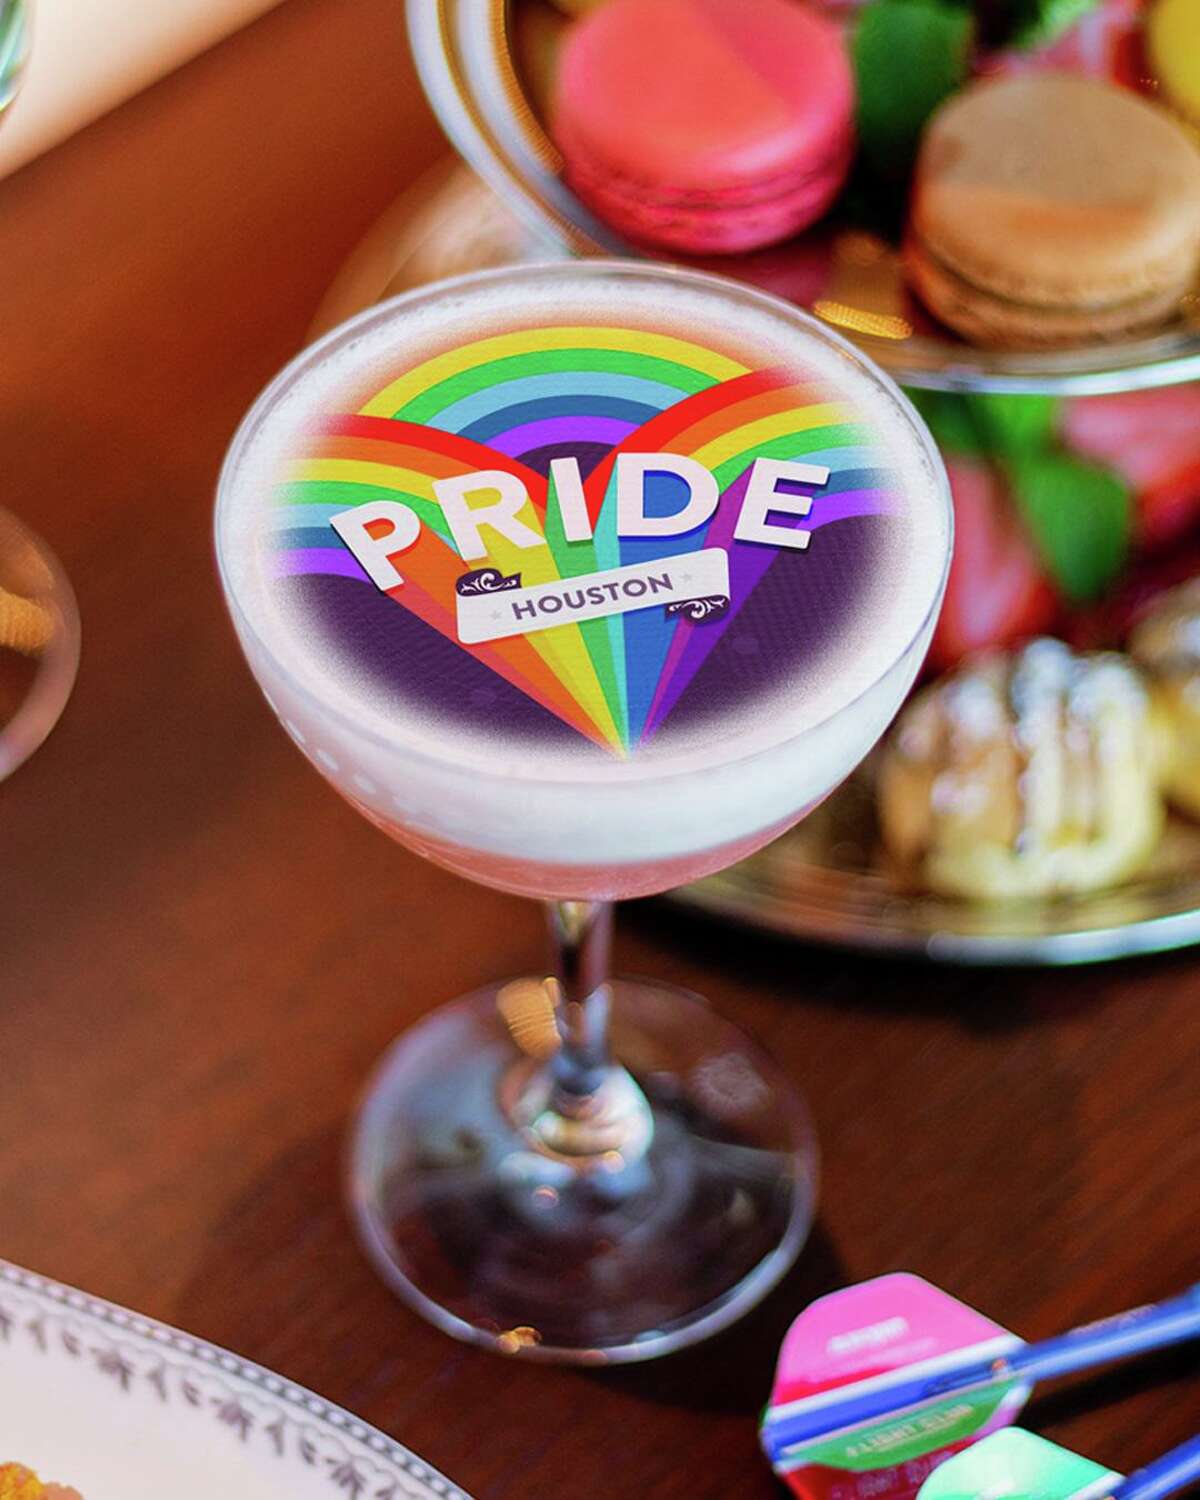 In honor of Pride Month, Flight Club Houston is partnering with The Montrose Center on a Pride signature cocktail.